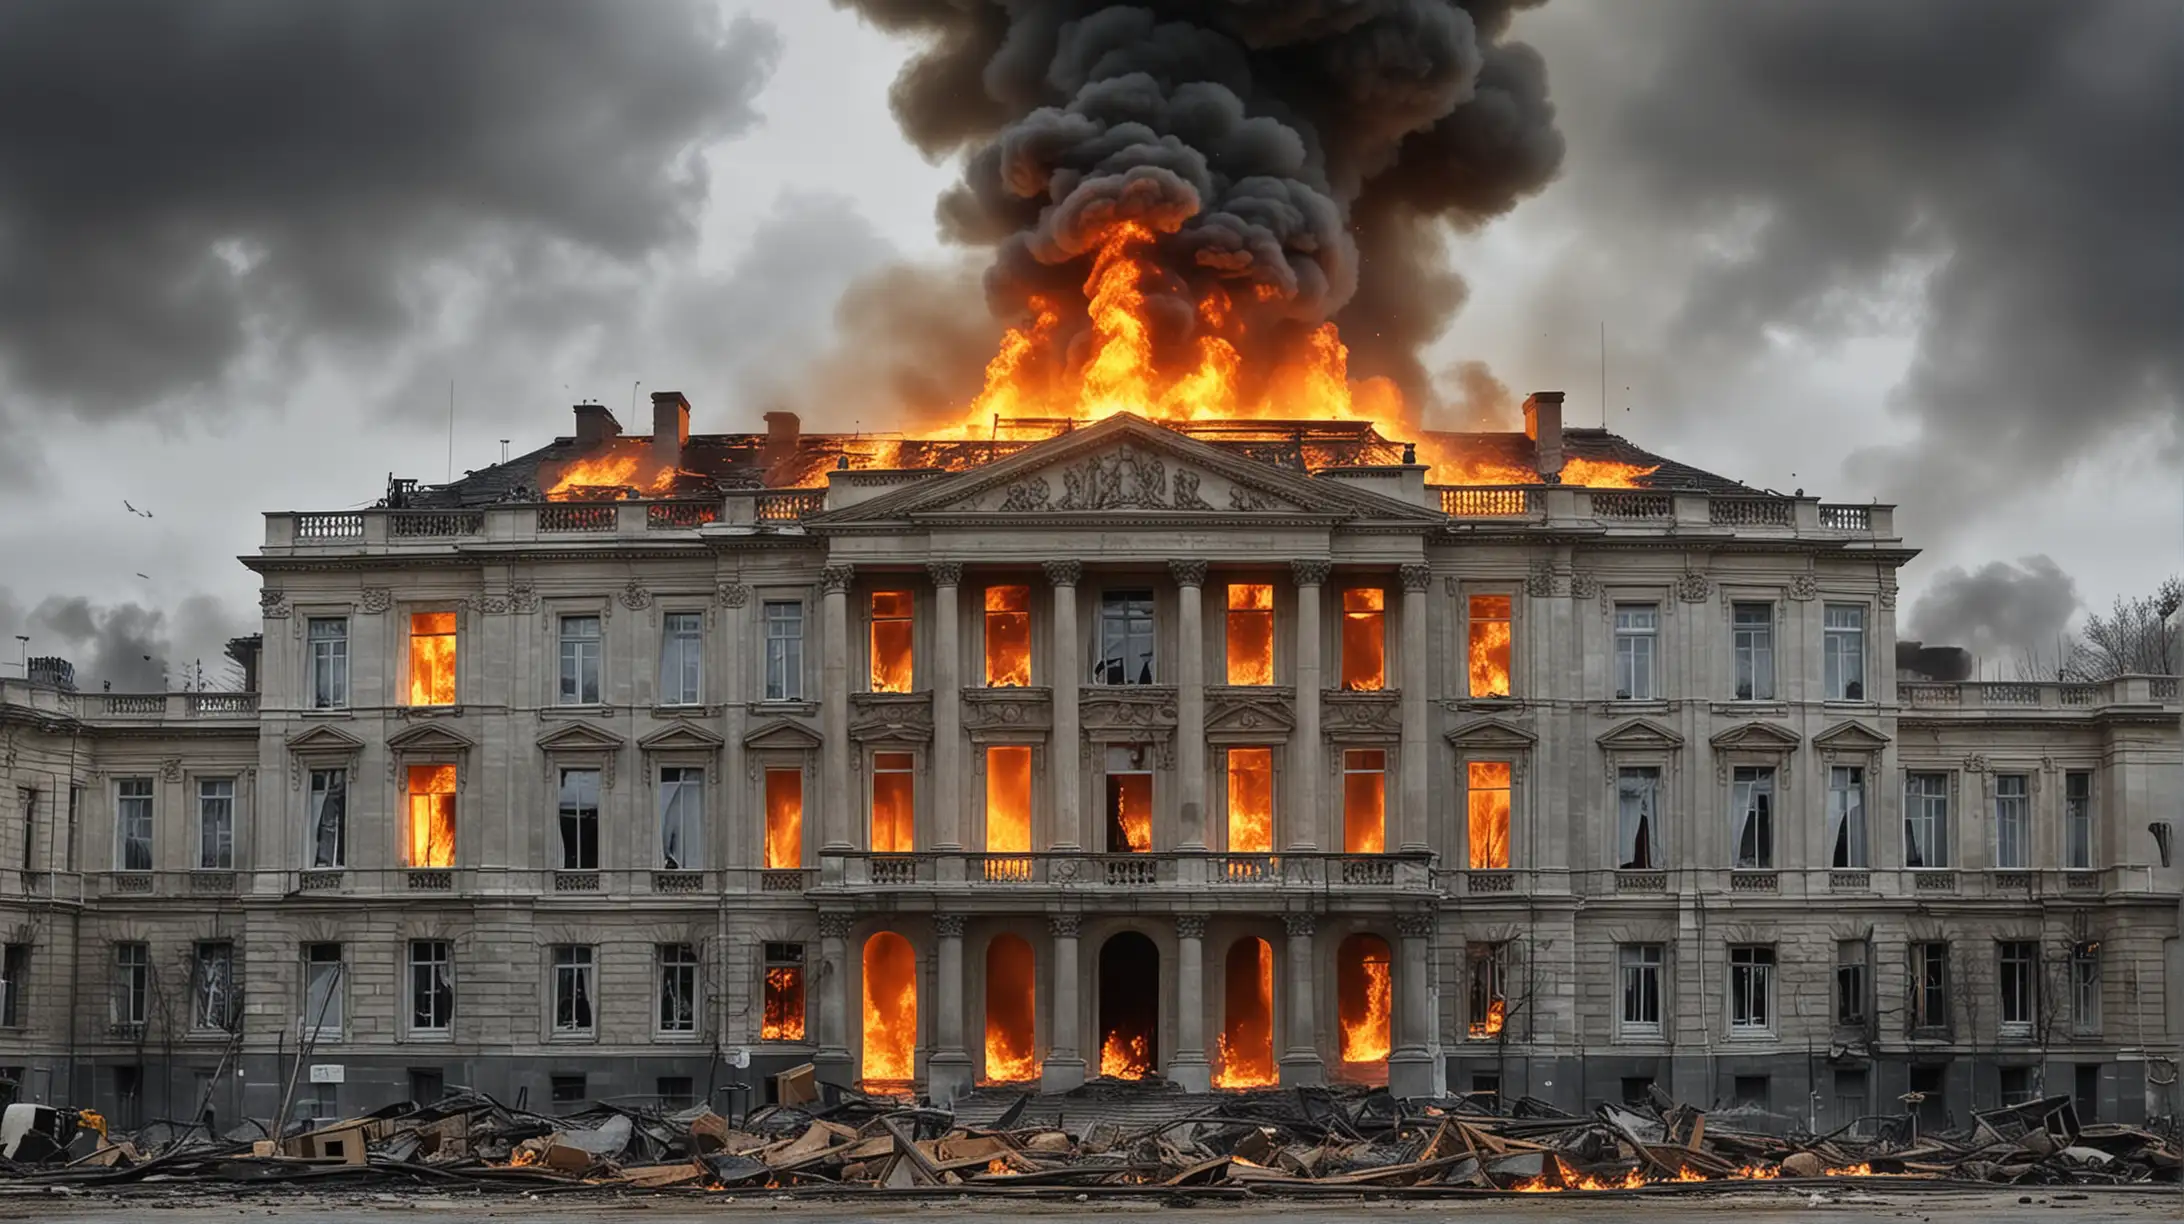 European Union Government Building Engulfed in Flames Amidst Economic Crisis